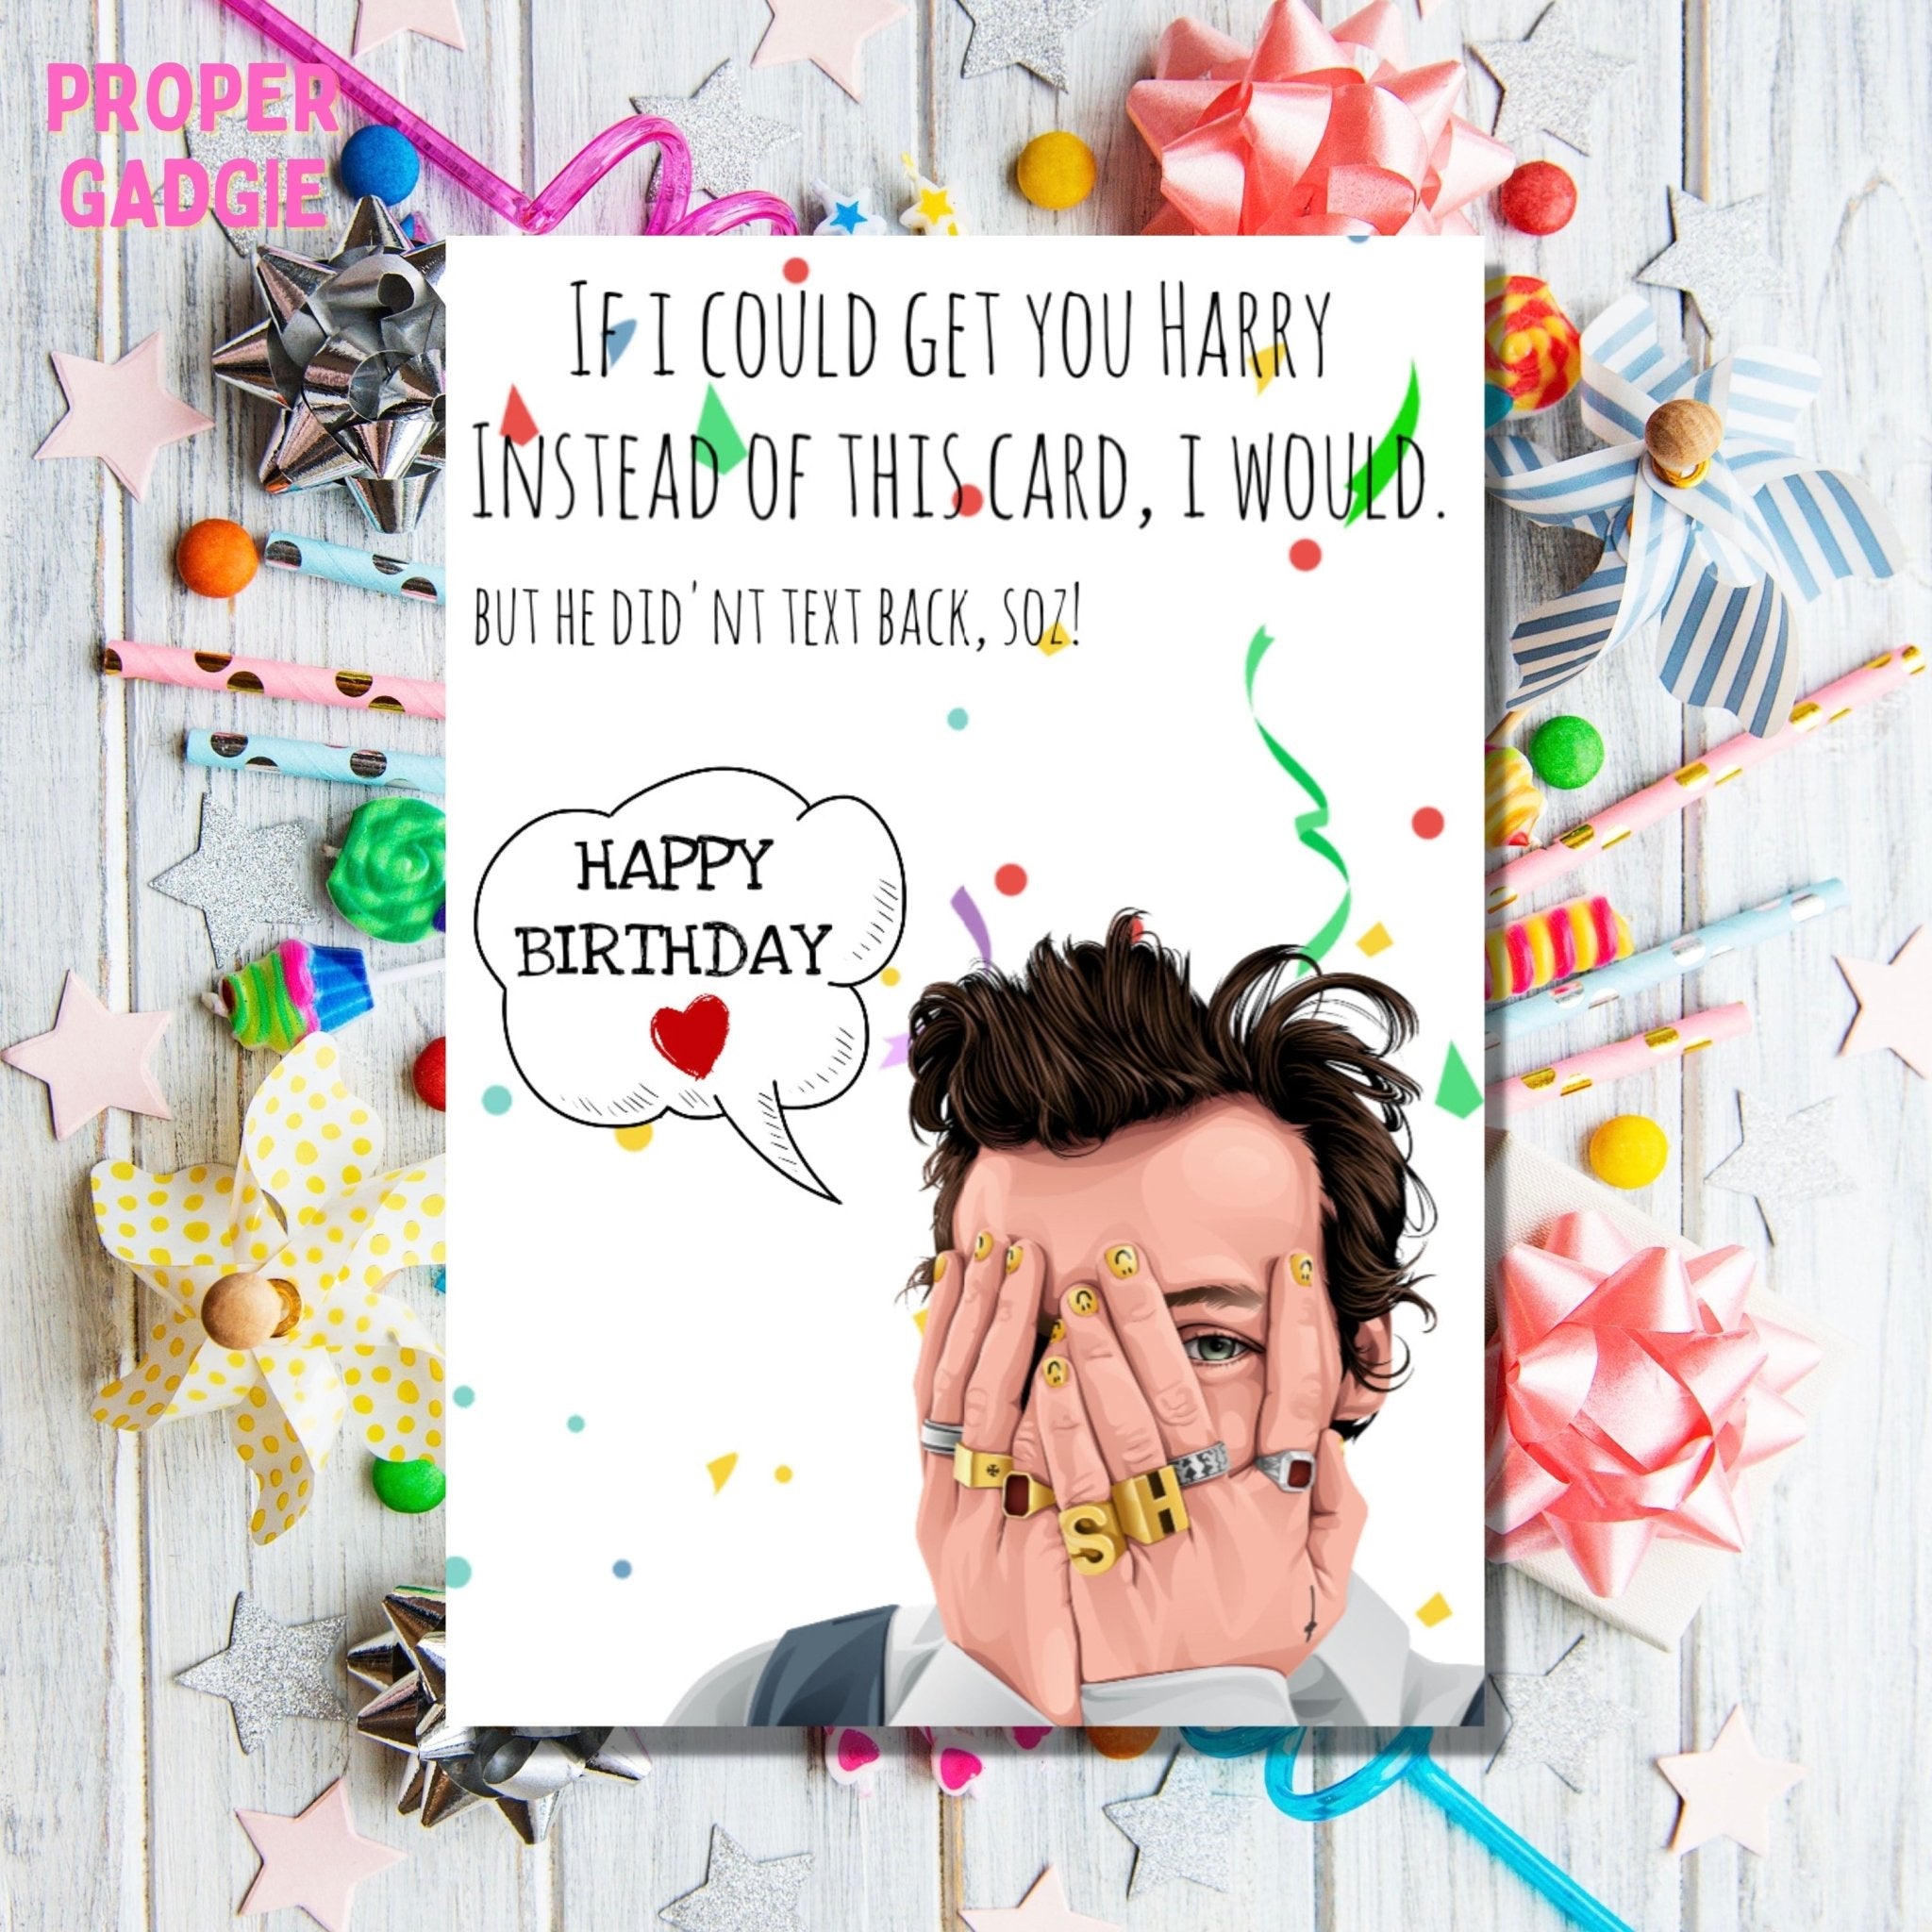 White Musical Themed Harry Styles Birthday Card For All Occasion With Envelope, A5 Size - ©️Proper Gadgie 2023